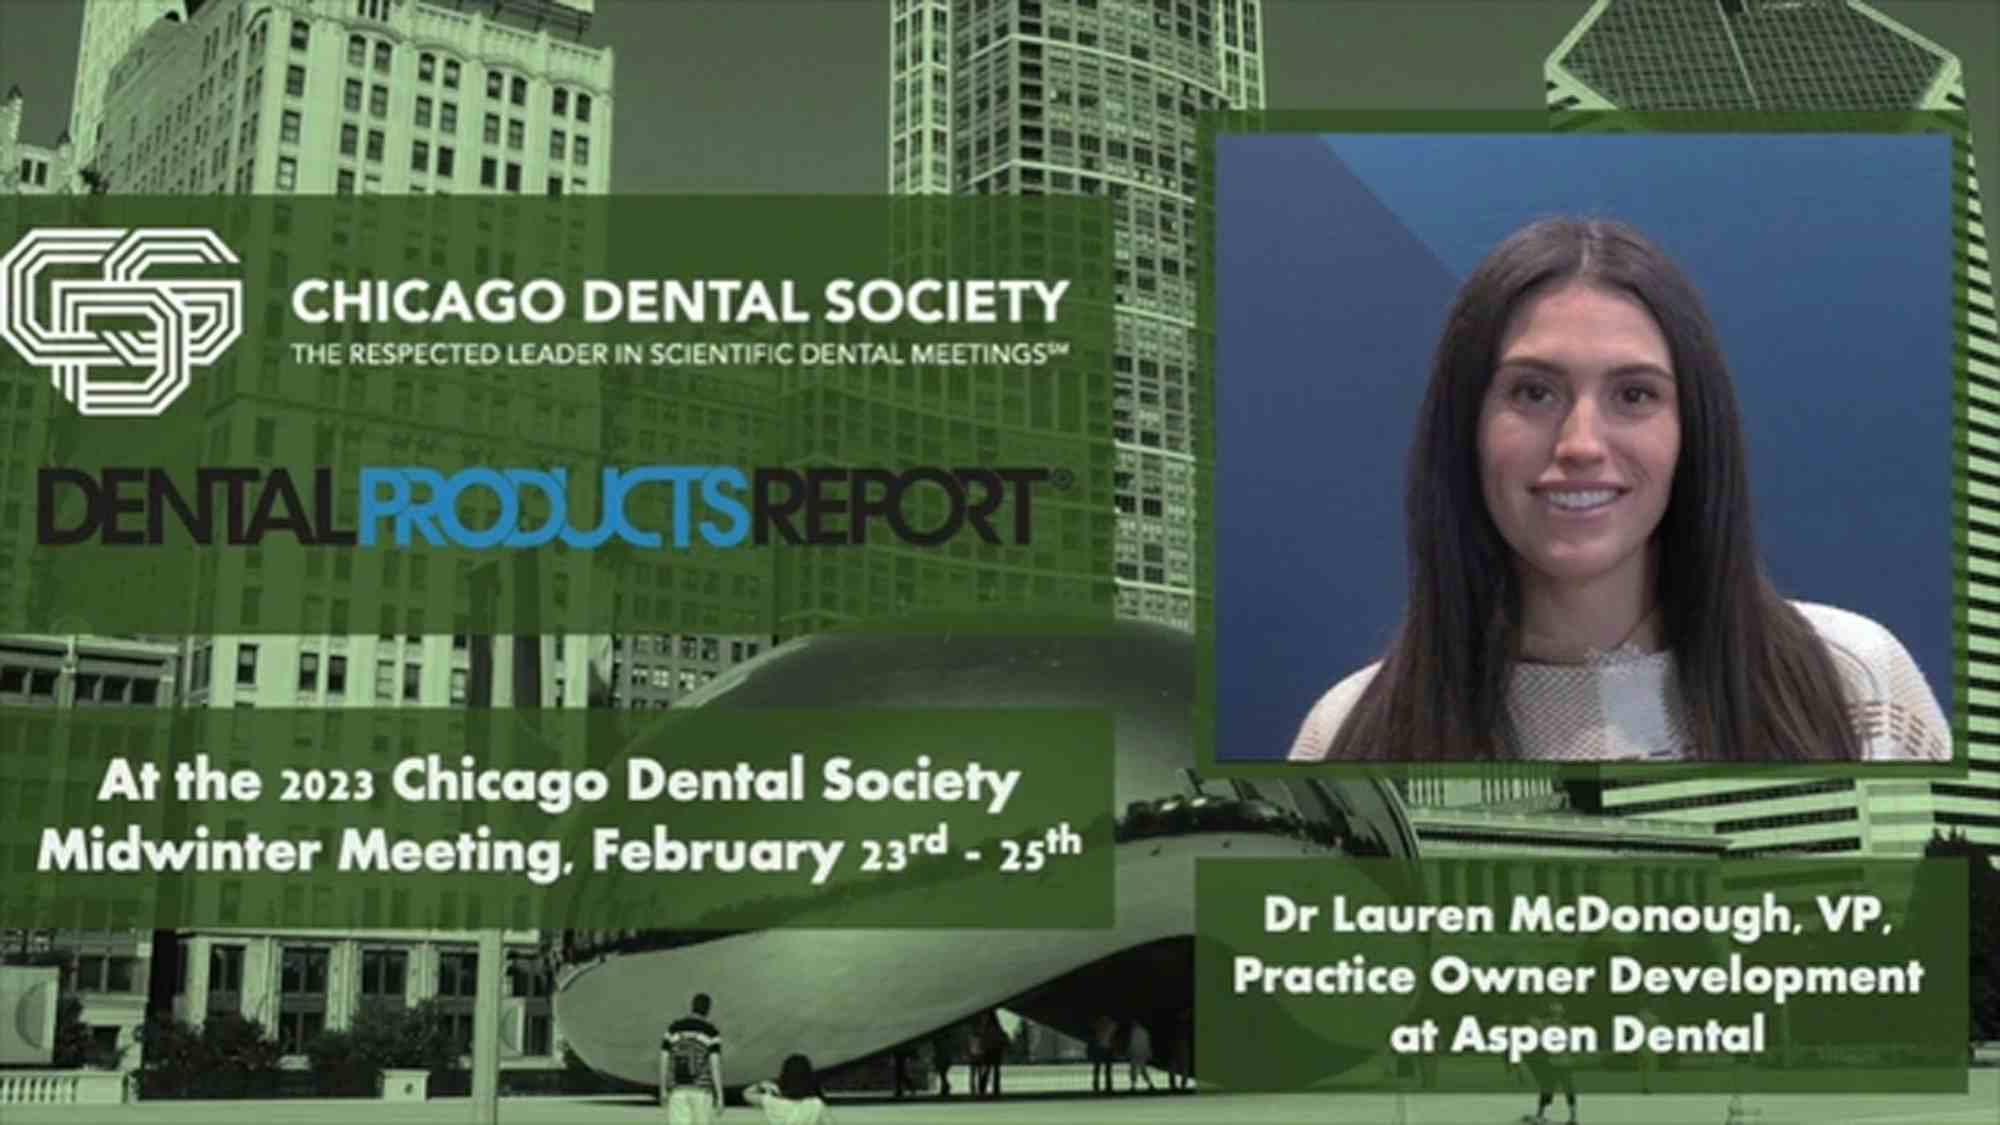 2023 Chicago Dental Society Midwinter Meeting, Interview with Dr Lauren McDonough, VP, Practice Owner Development at Aspen Dental